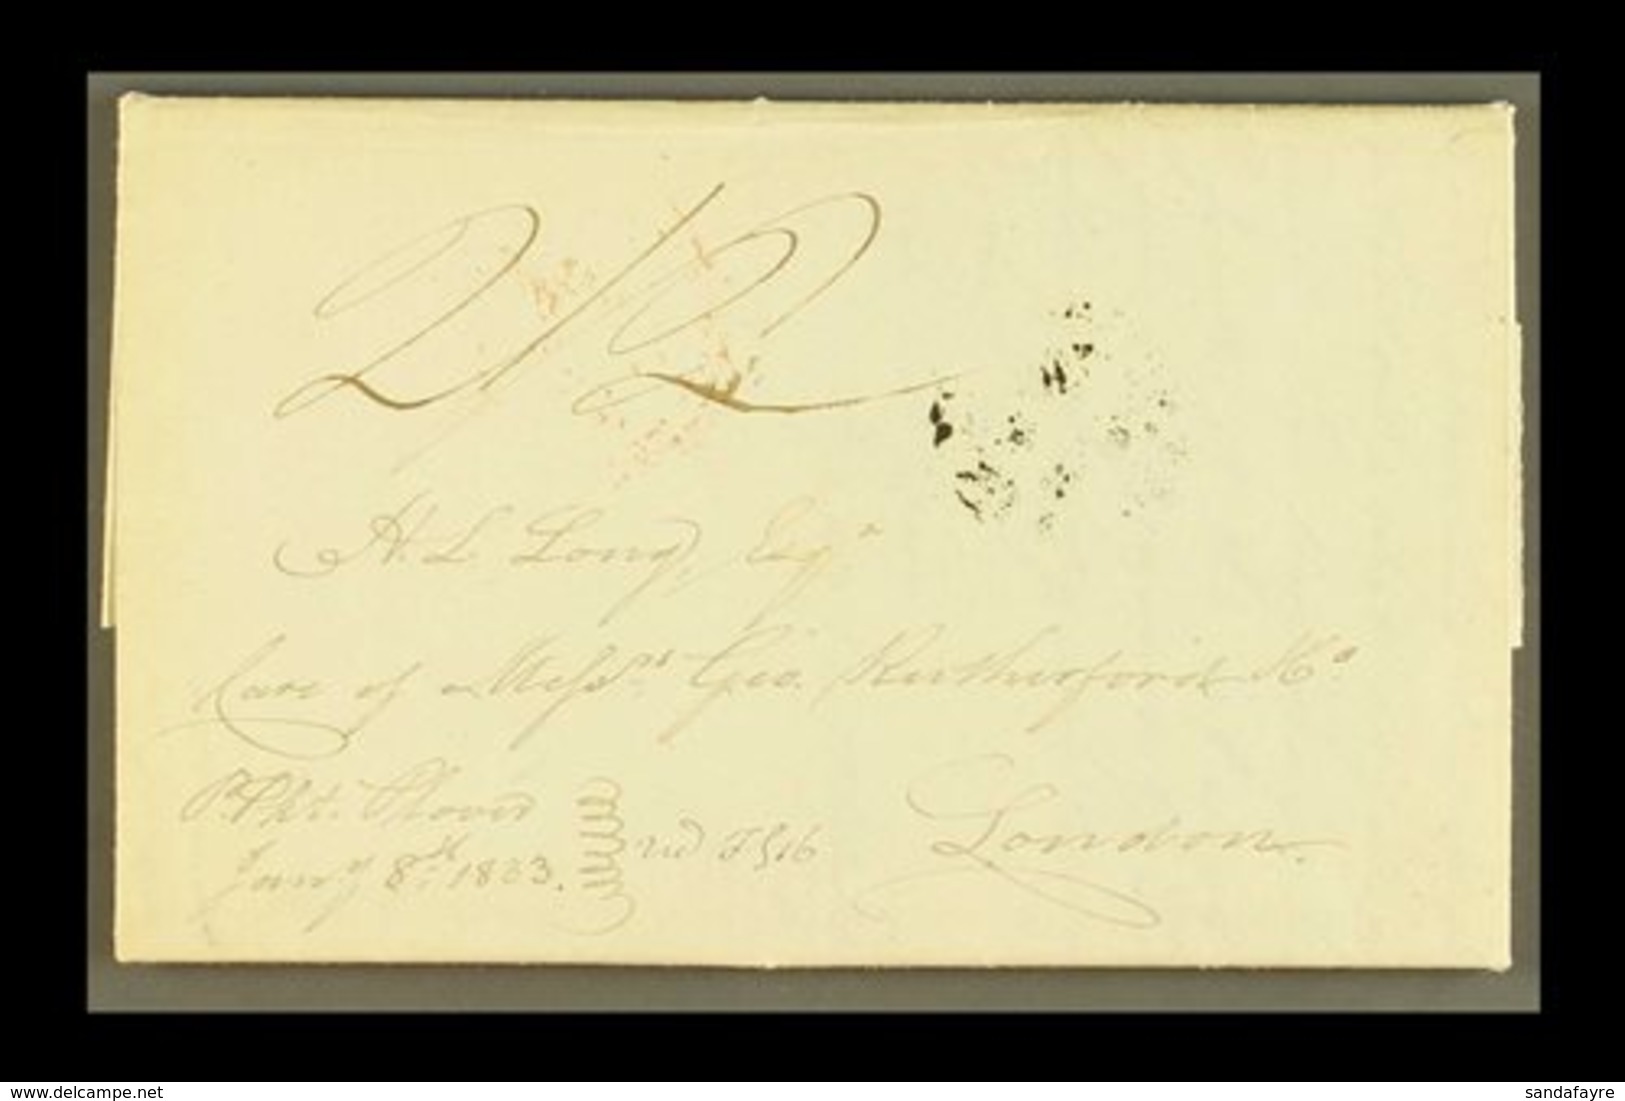 1833 LUCKY VALLEY, CLARENDON, SUGAR PLANTATION ENTIRE LETTER TO H.L. LONG (LANDOWNER) IN LONDON, MENTION OF NEGROES & NA - Jamaïque (...-1961)